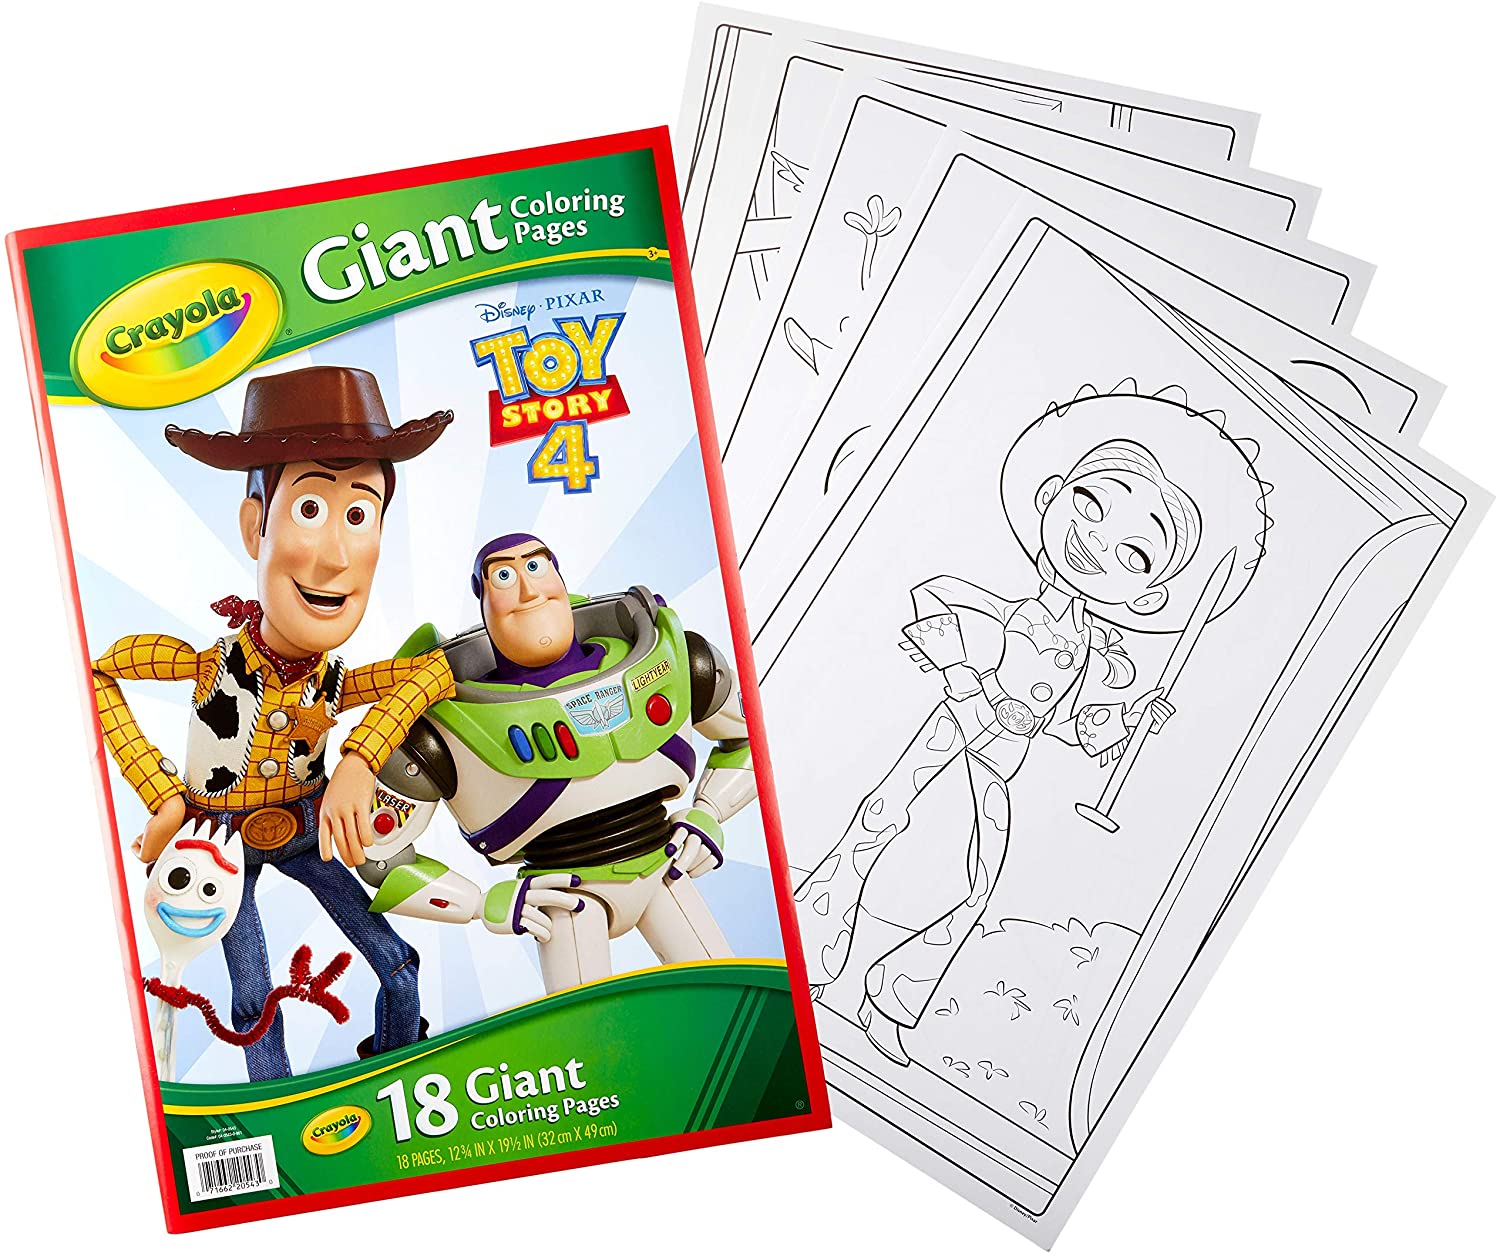 Crayola giant loring pages toy story